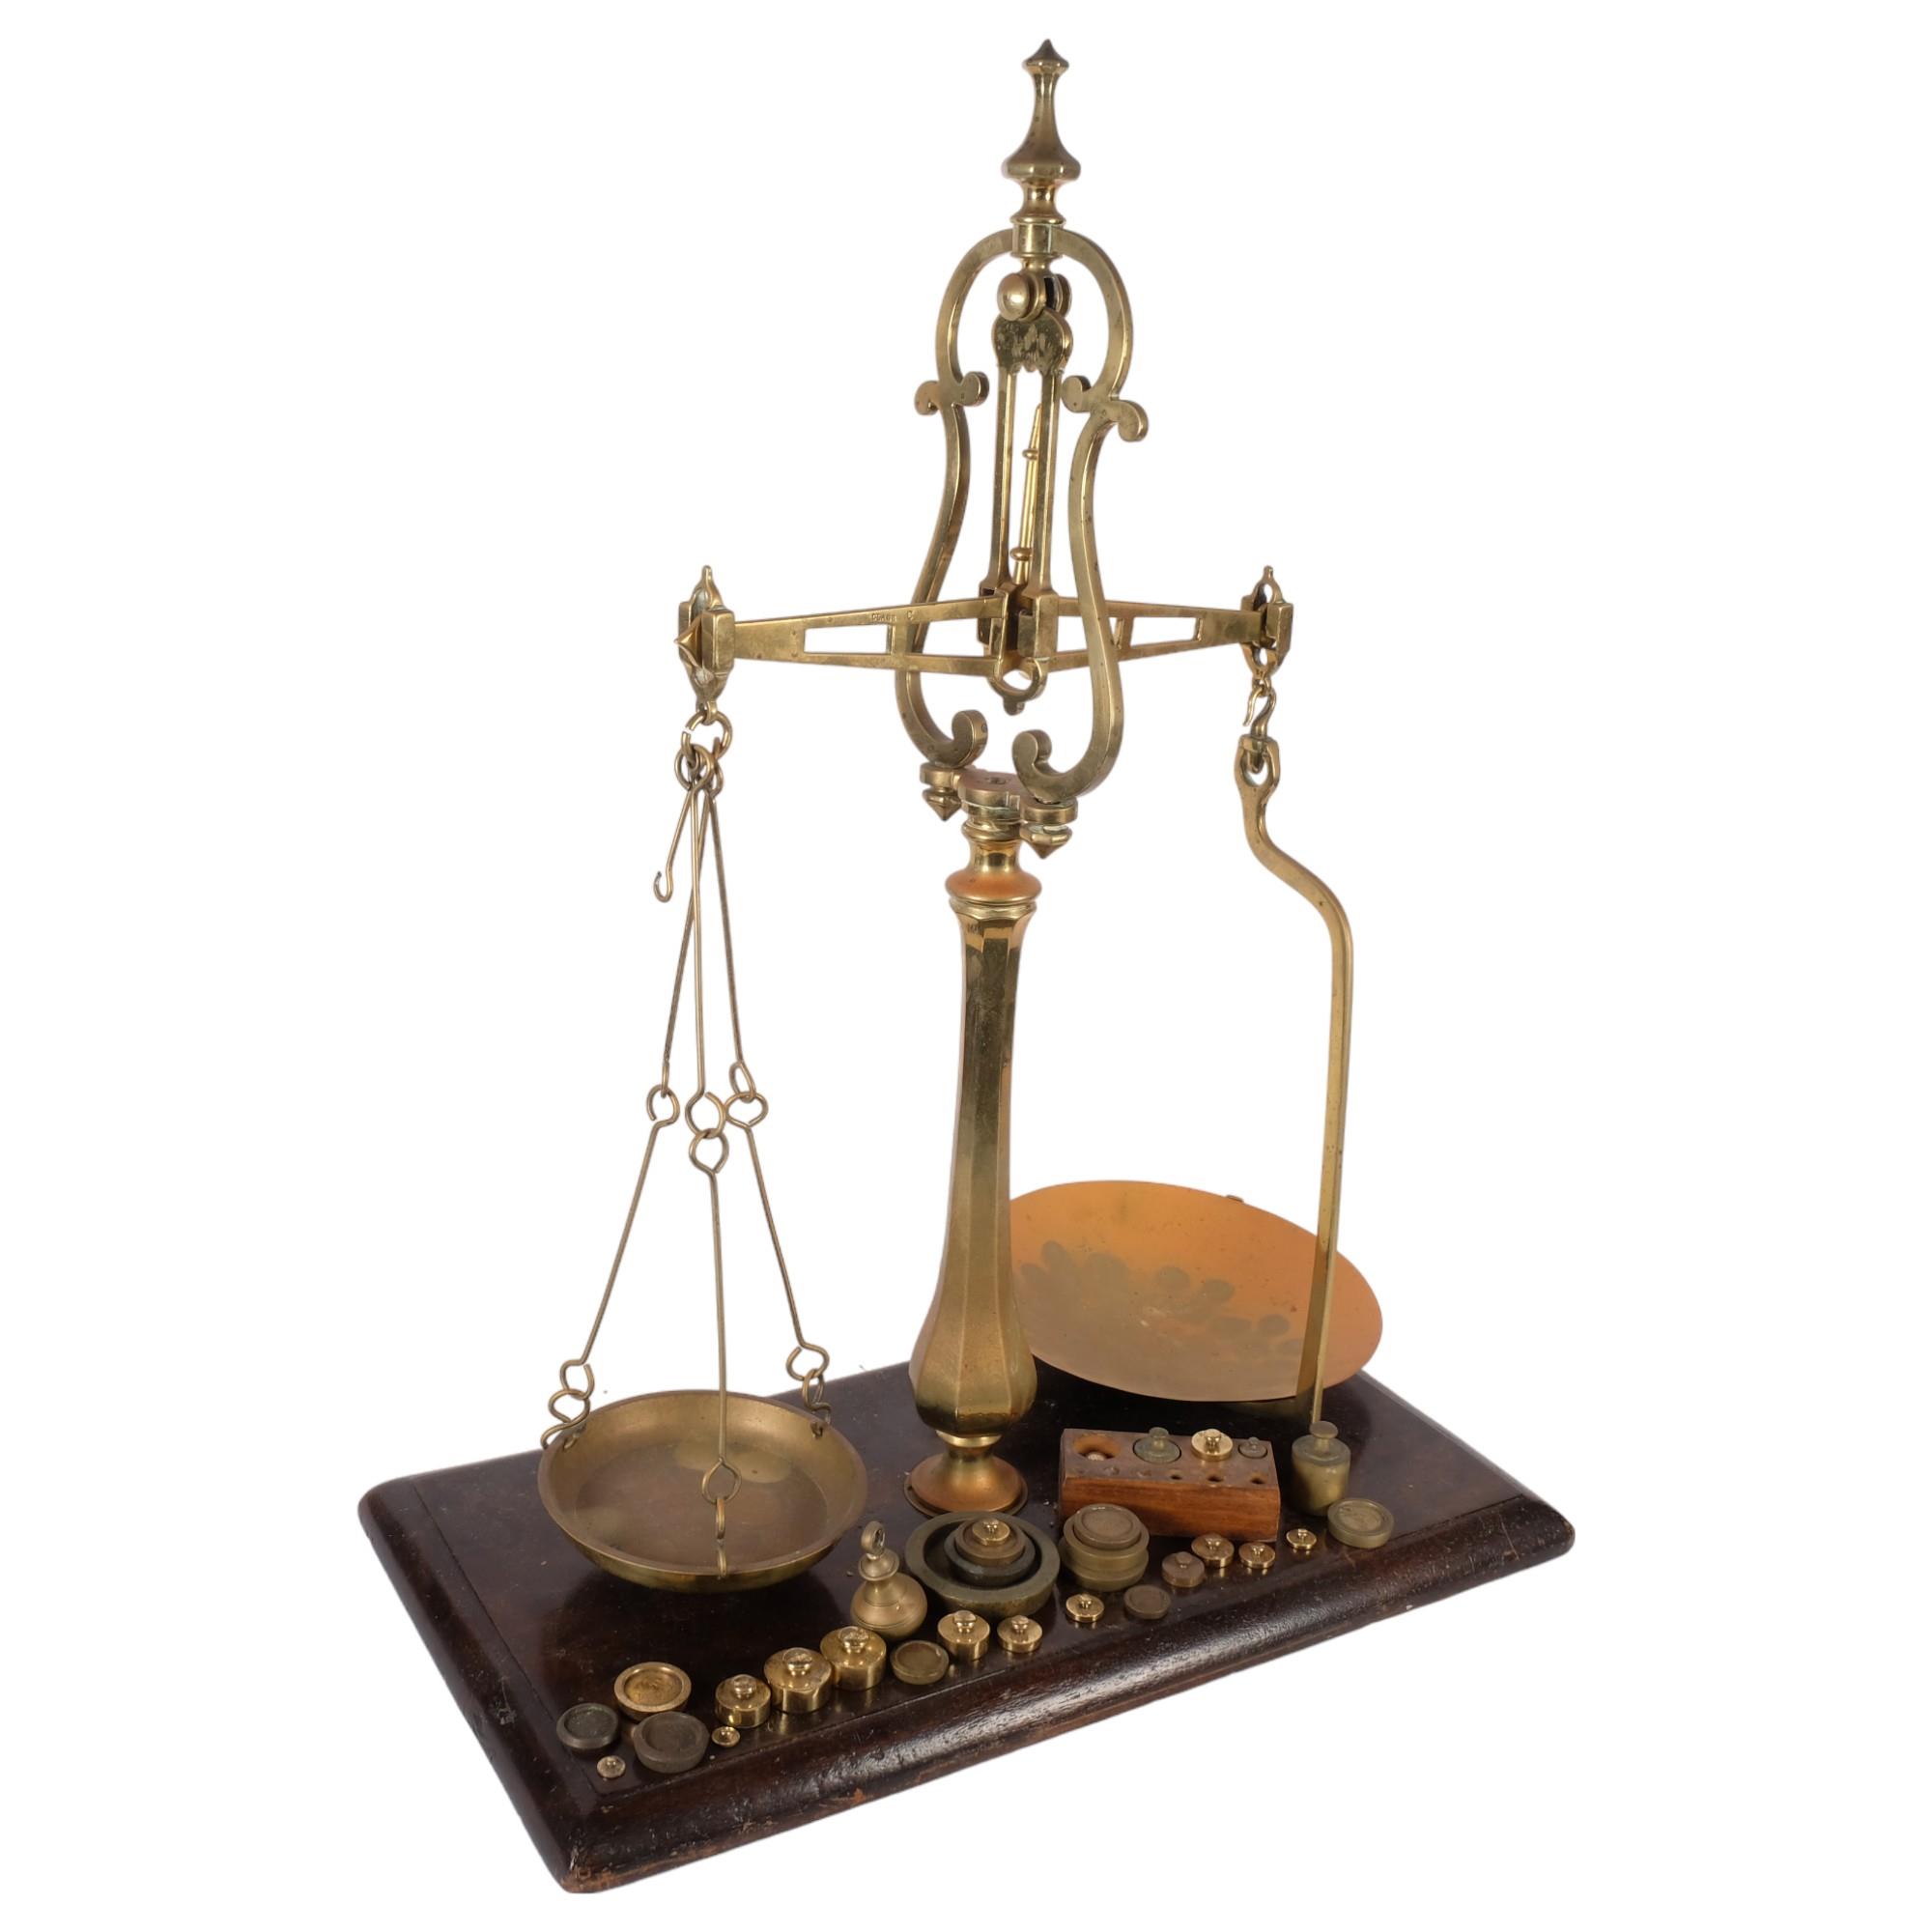 A large Antique brass balance scale and weights, on stained wood plinth, H77cm